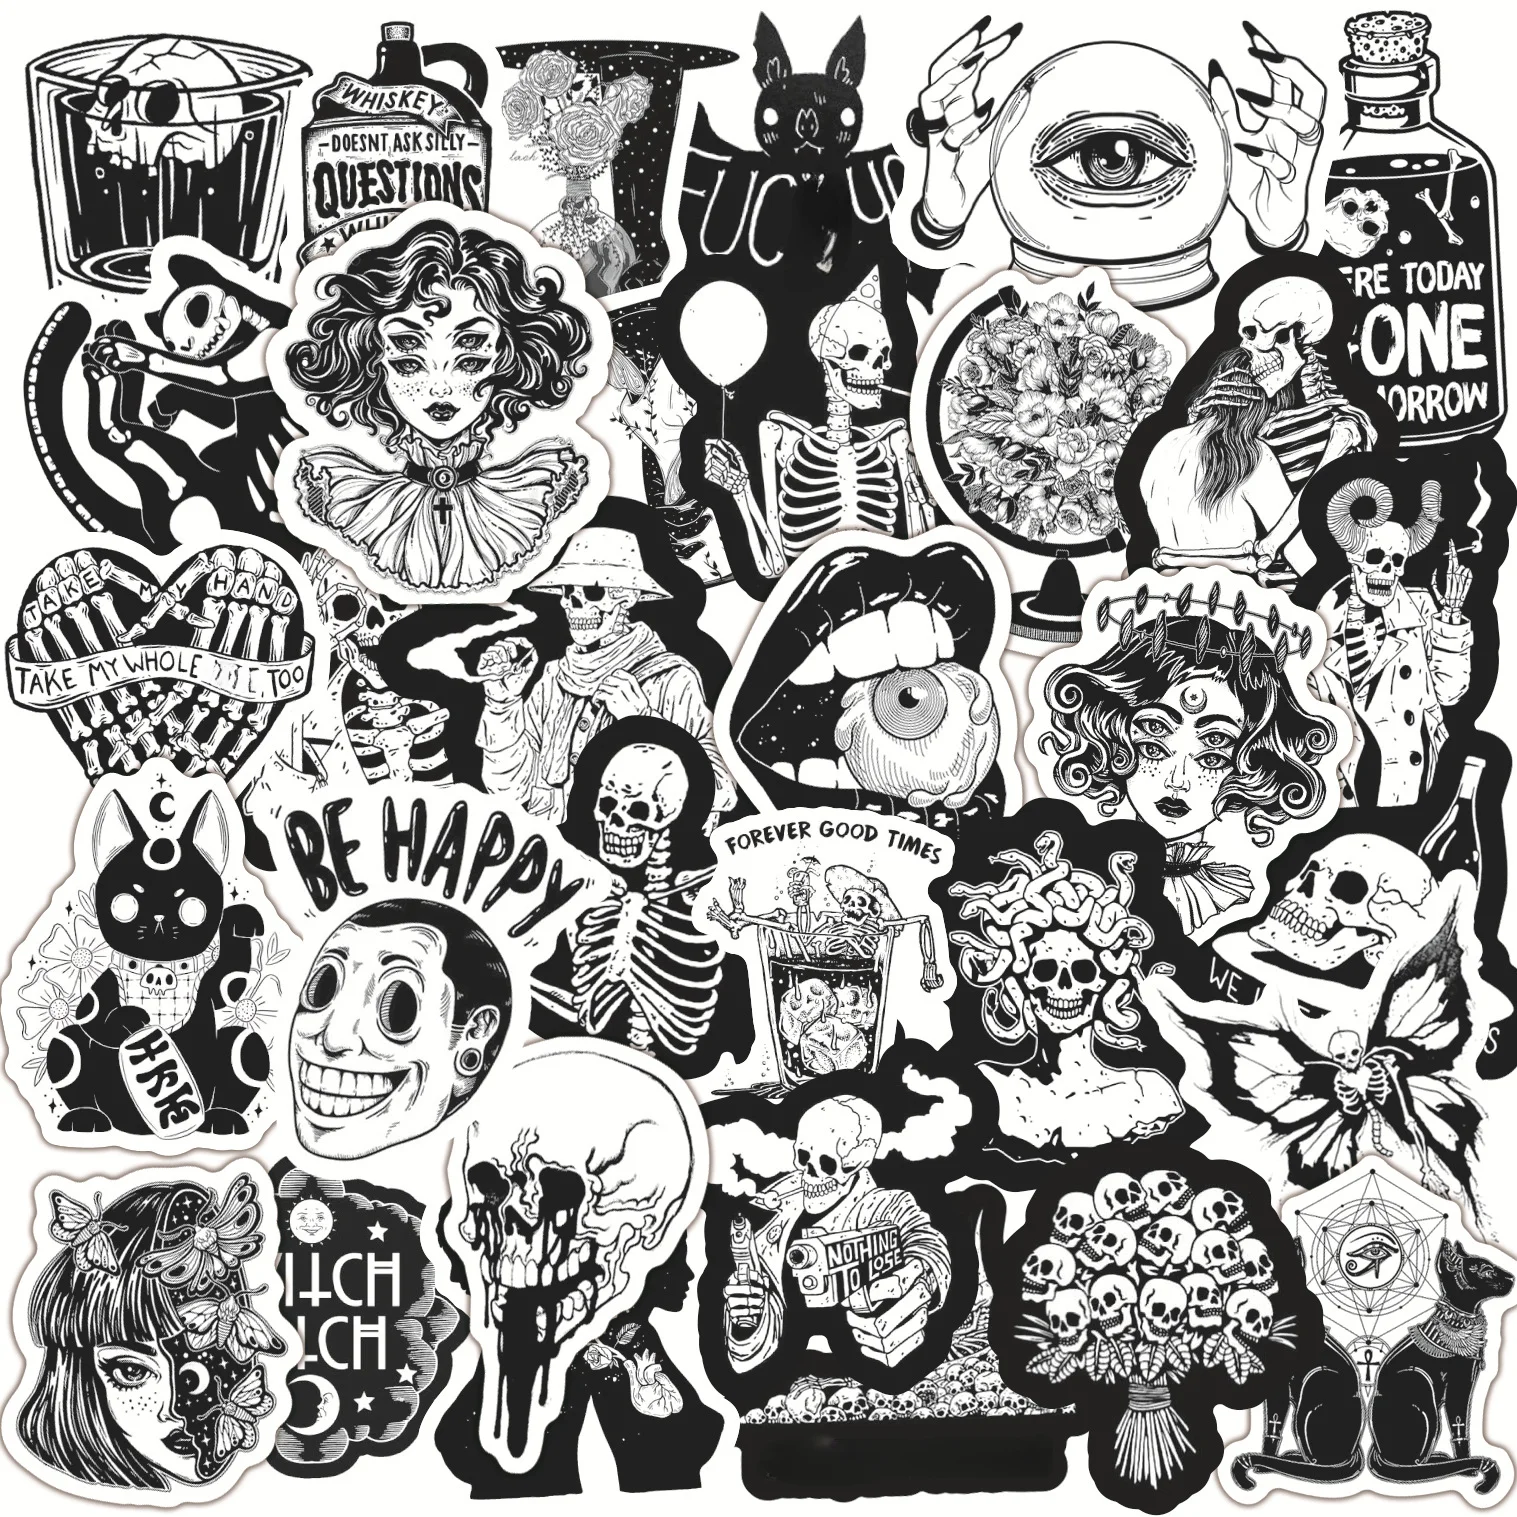 100PCS Mixed Black White Gothic Stickers Graffiti Motorcycle Skateboard Travel Phone Case Decal Toys Sticker Waterproof 10 30 50 100pcs mixed neon light cartoon stickers aesthetic laptop guitar car phone cool graffiti waterproof sticker toys decals